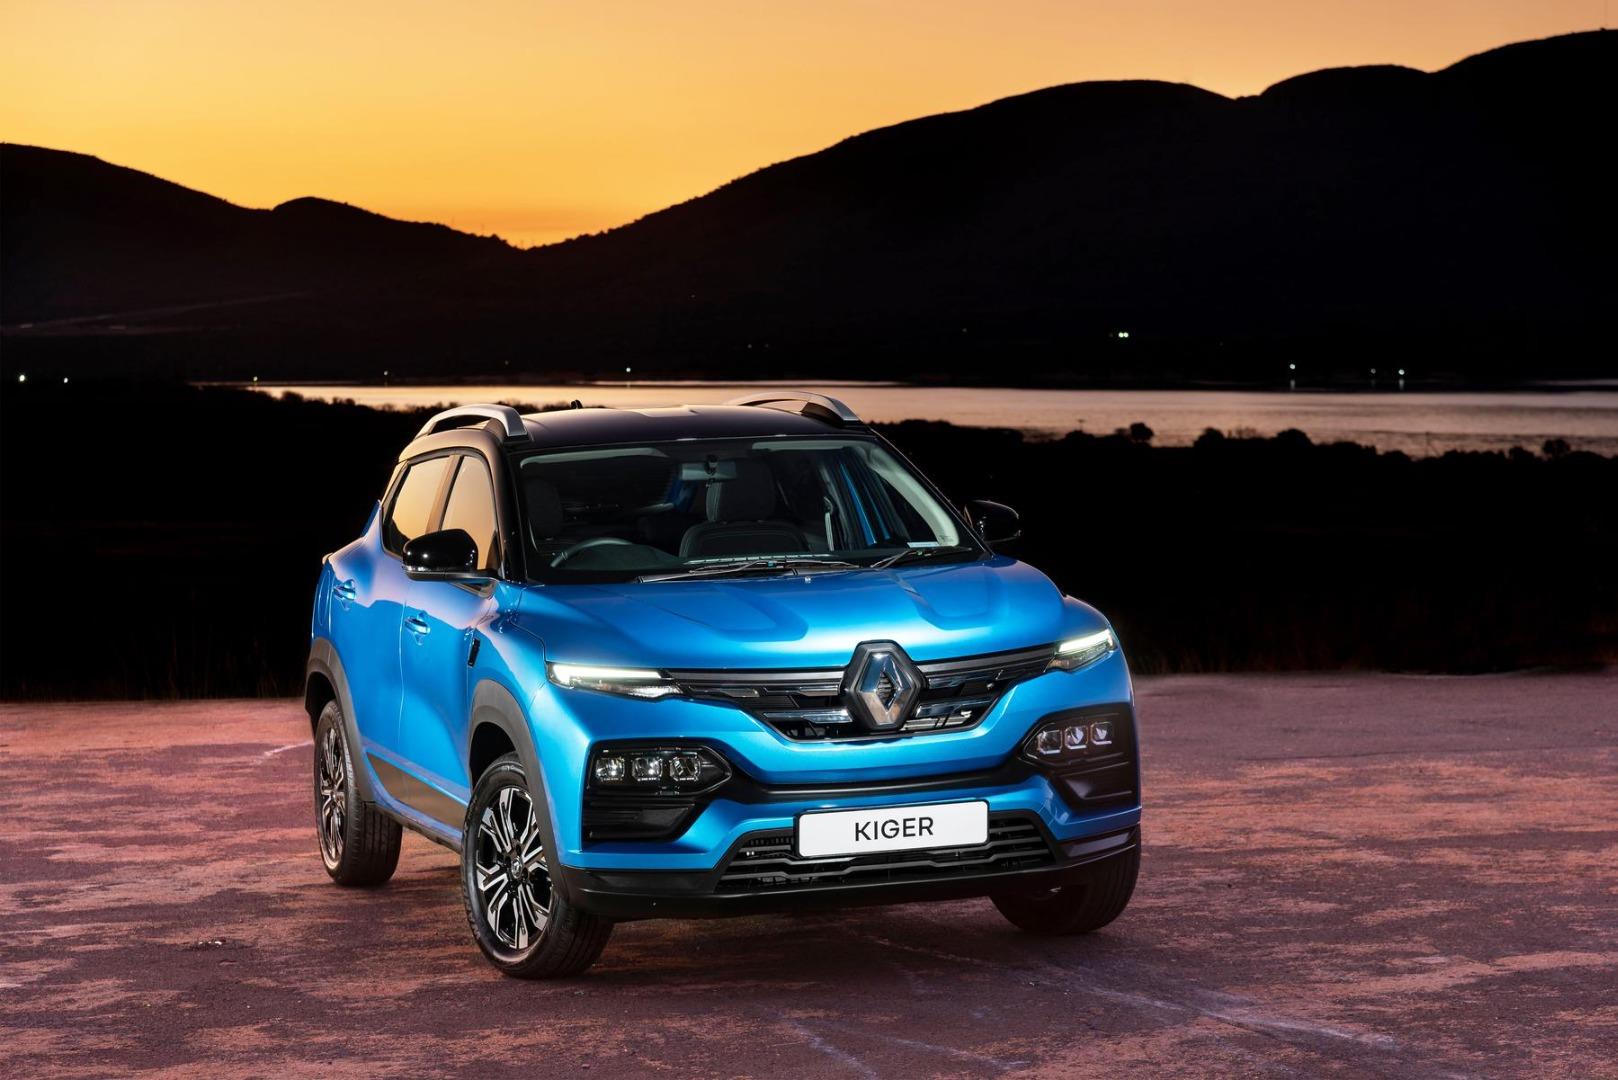 suzuki fronx vs renault kiger vs nissan magnite: which one has the lowest running costs?